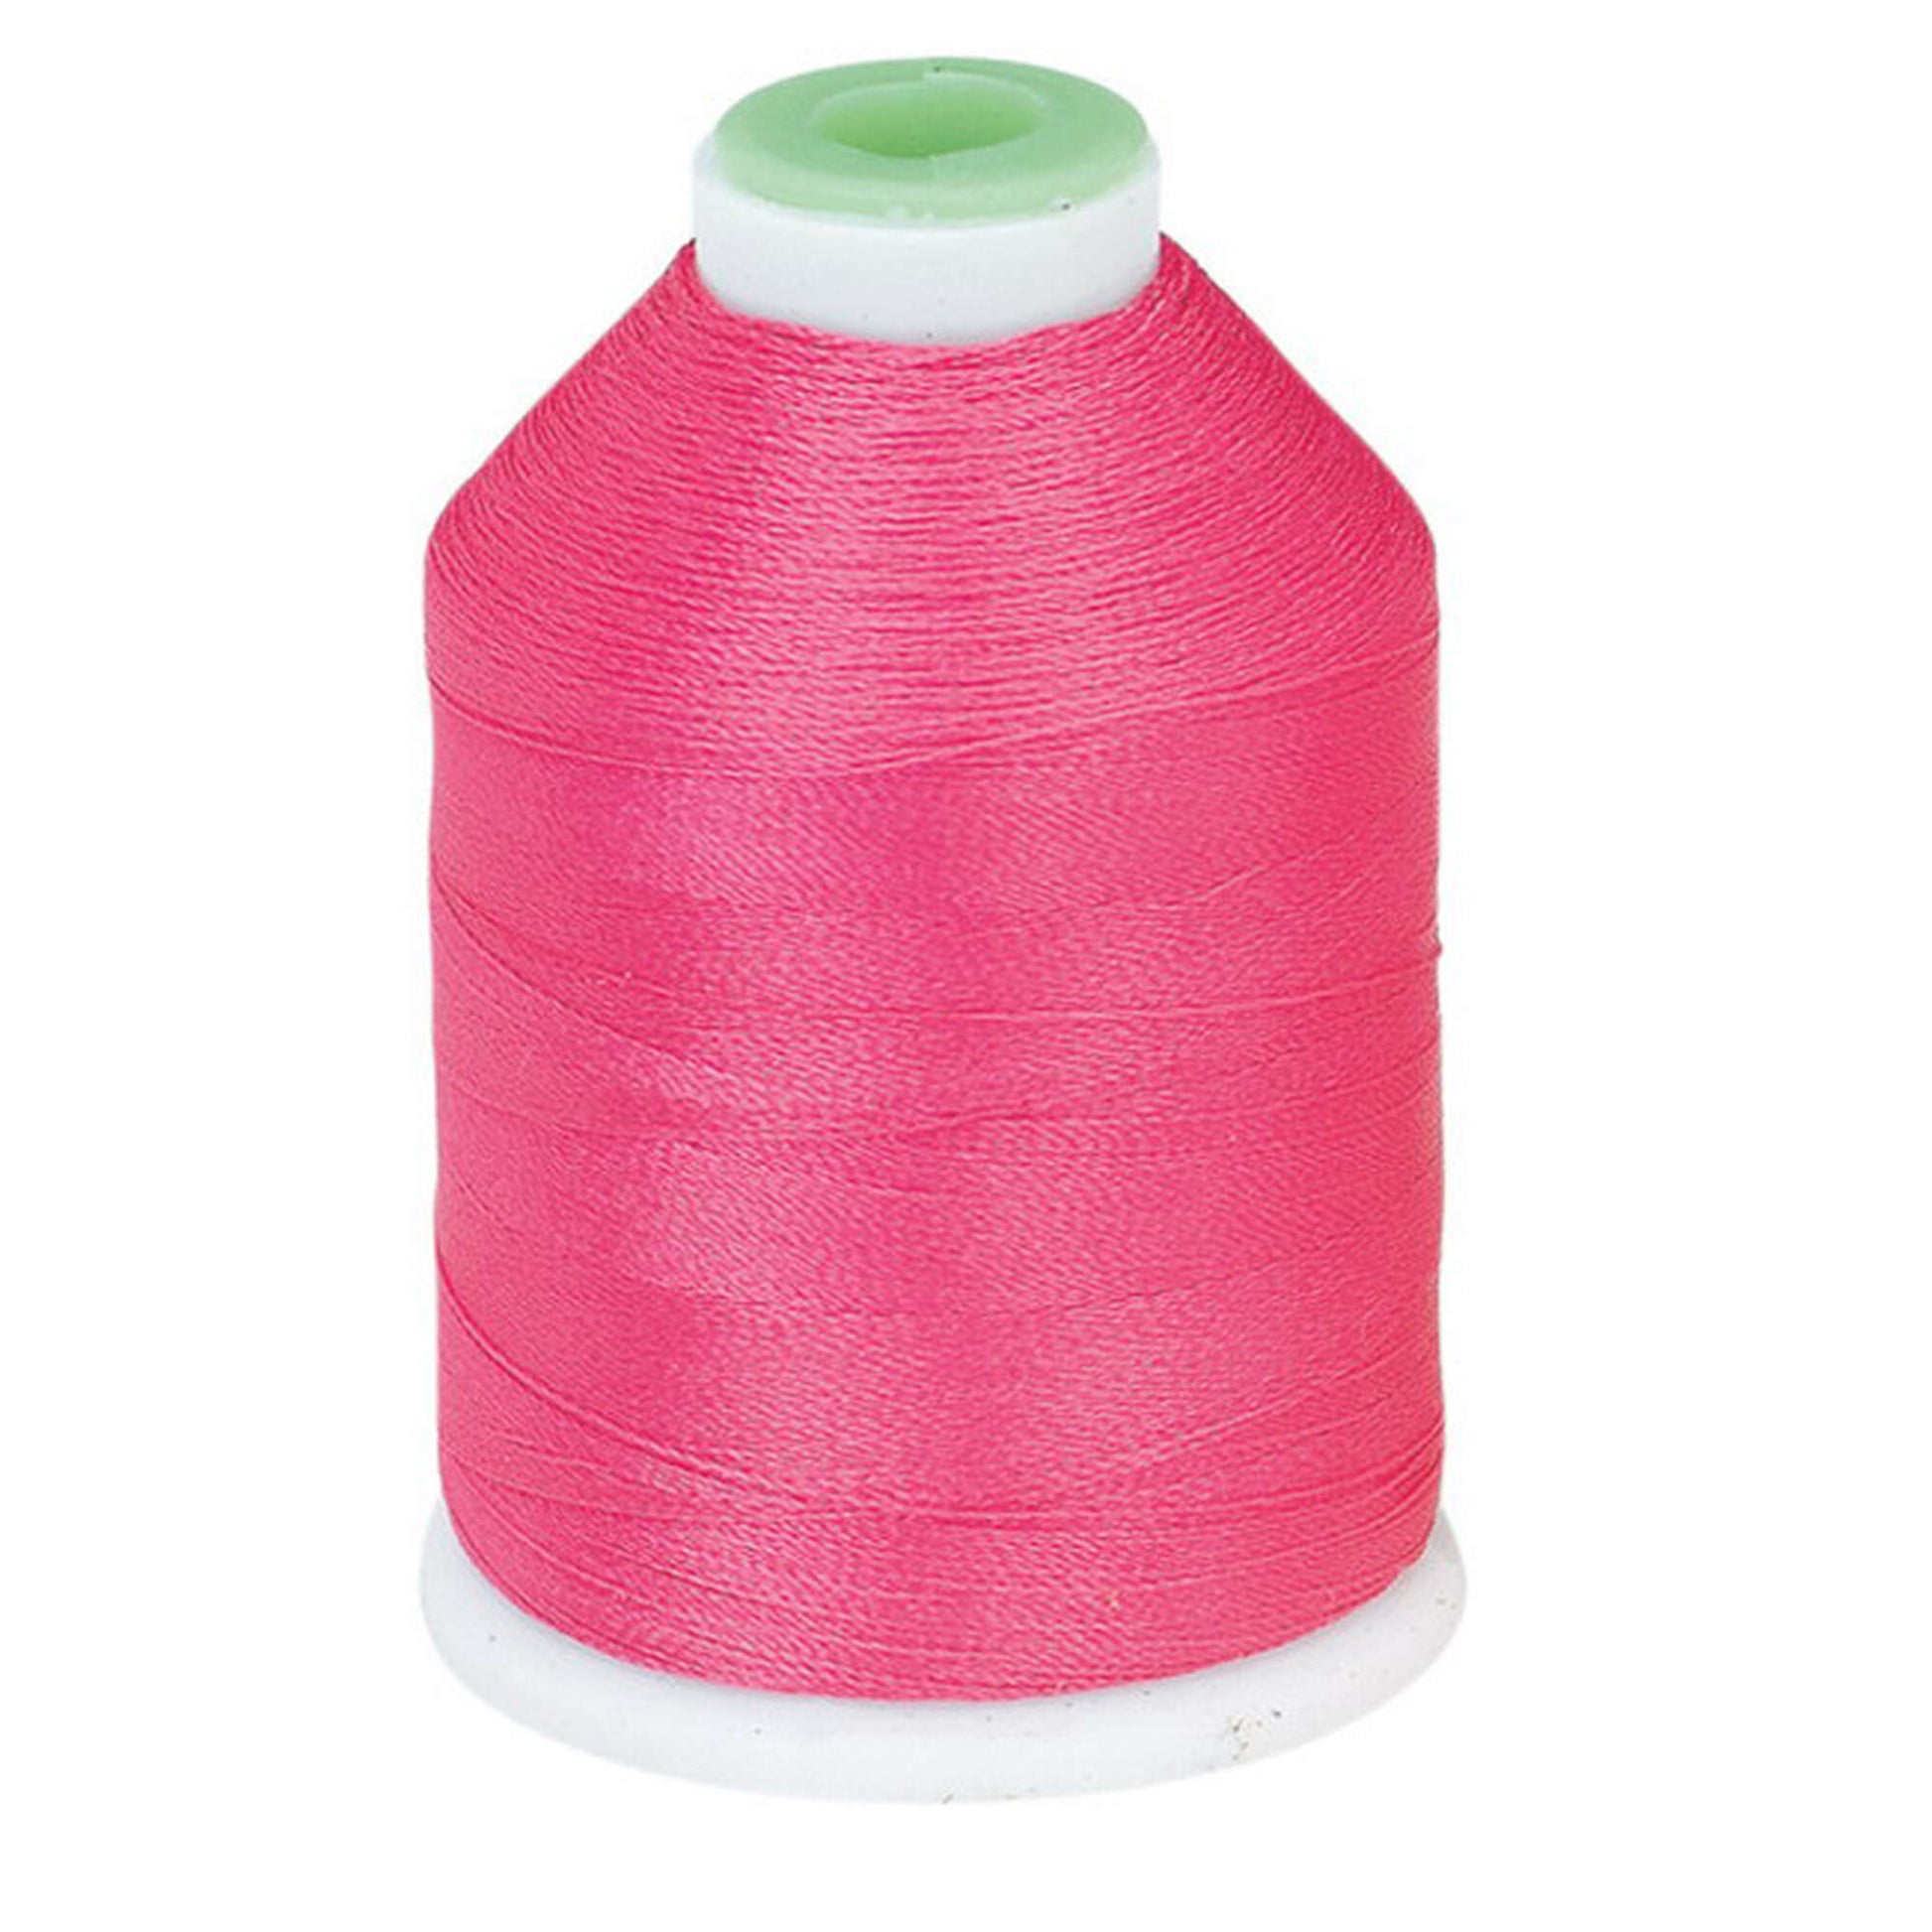 Coats & Clark Machine Embroidery Thread (1100 Yards) Red Rose